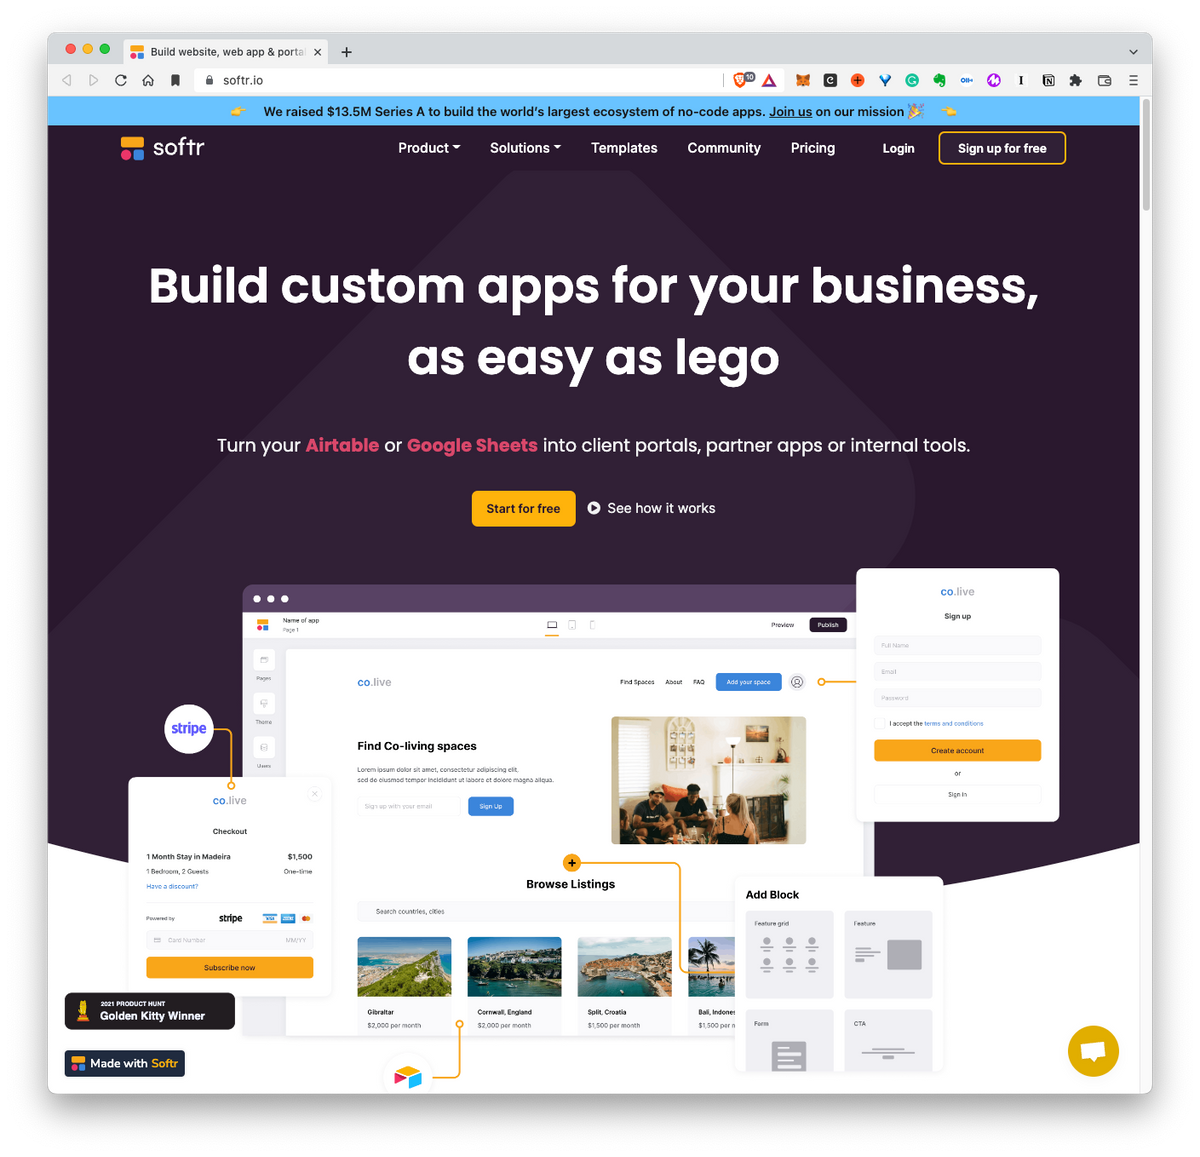 Softr: Build custom apps for your business, as easy as lego.